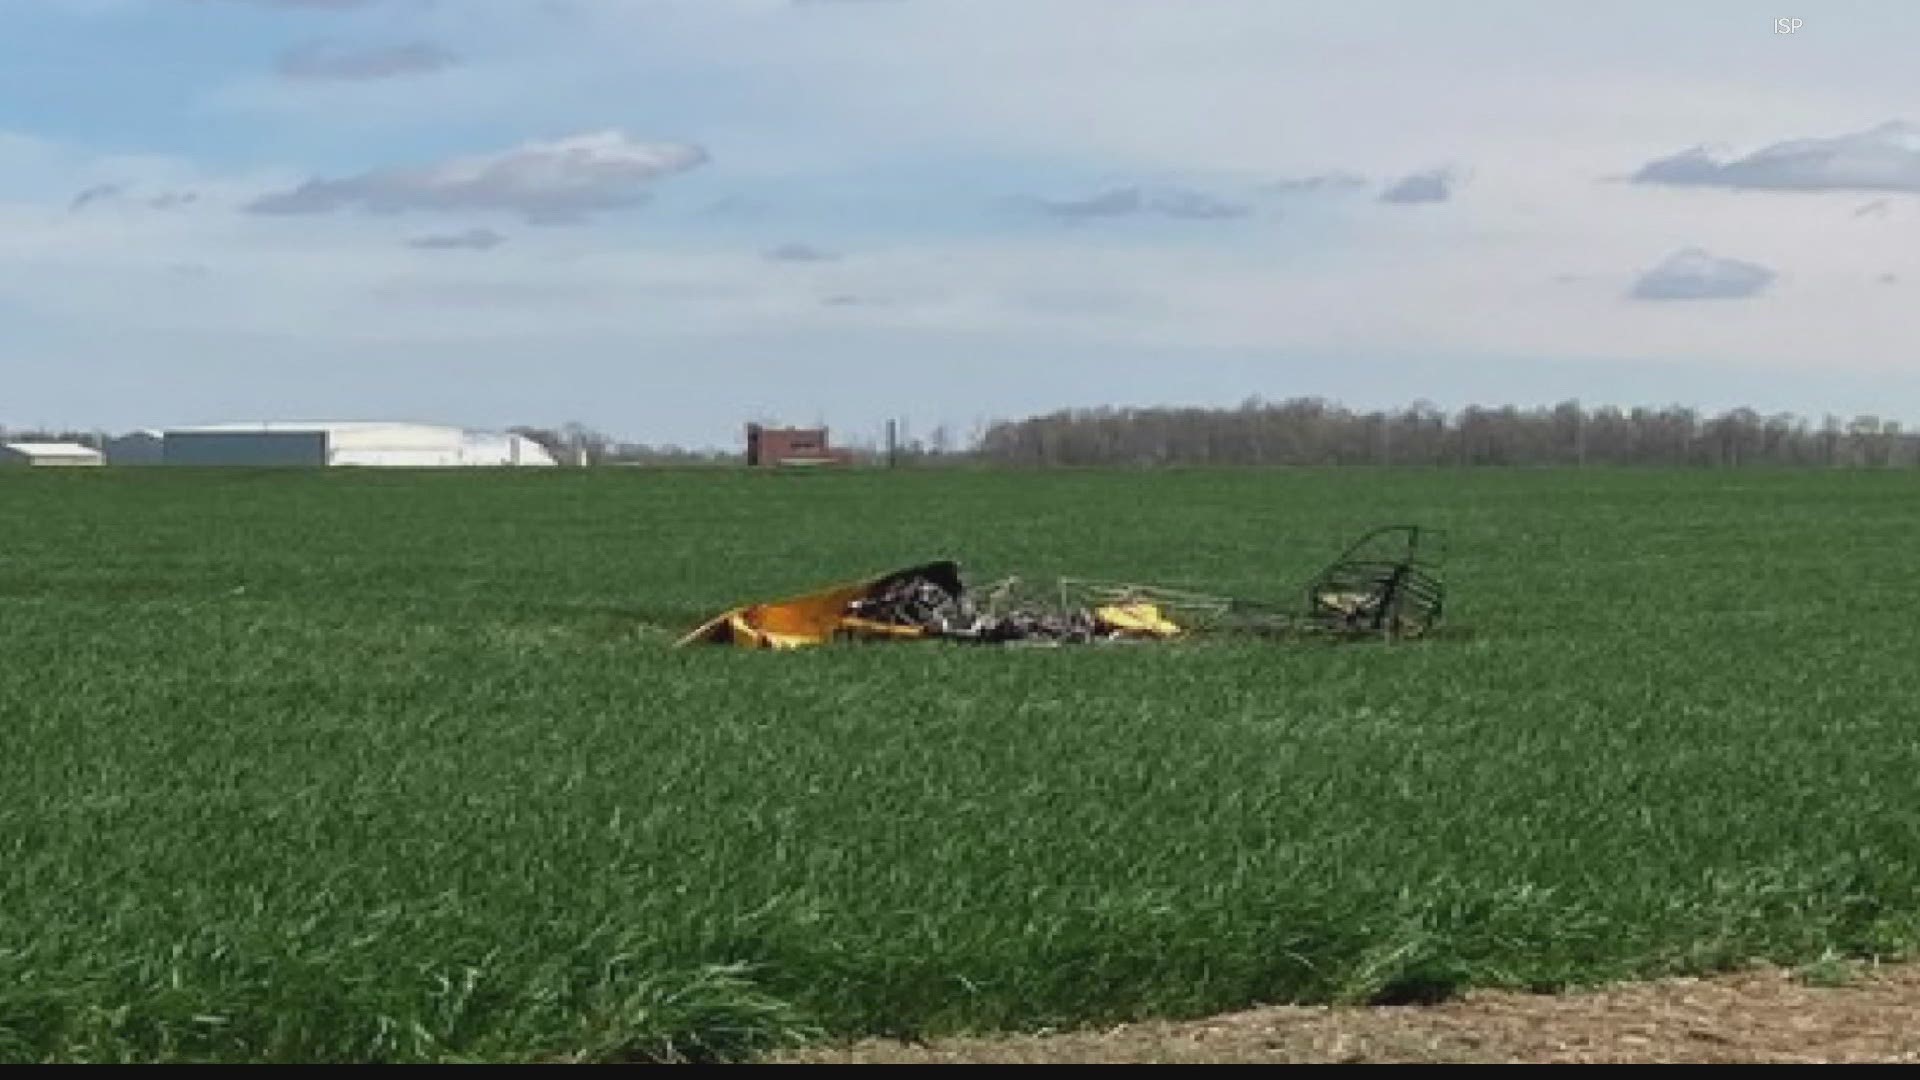 The pilot was traveling to visit family in Arizona when his plane crashed in Richmond, Indiana.